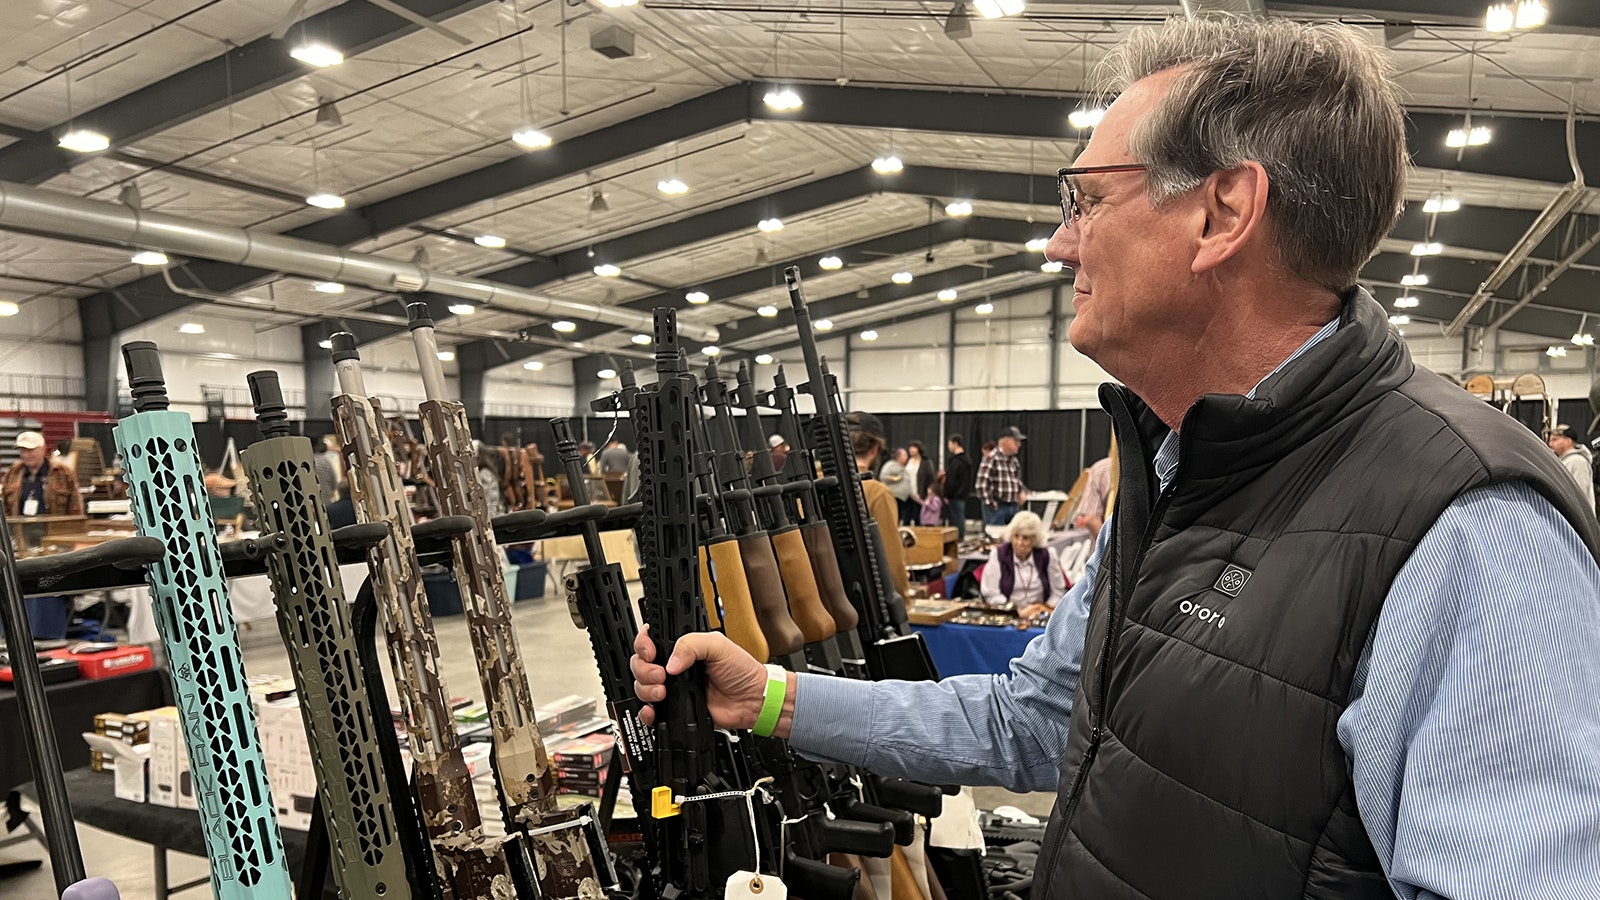 Dean Brantly of Georgia checks out his “dream gun,” a Daniel Defense AR-10 chambered in 7.62 x 51 mm NATO at the New Frontier Gun Show and Western Collectibles Show in Cheyenne.